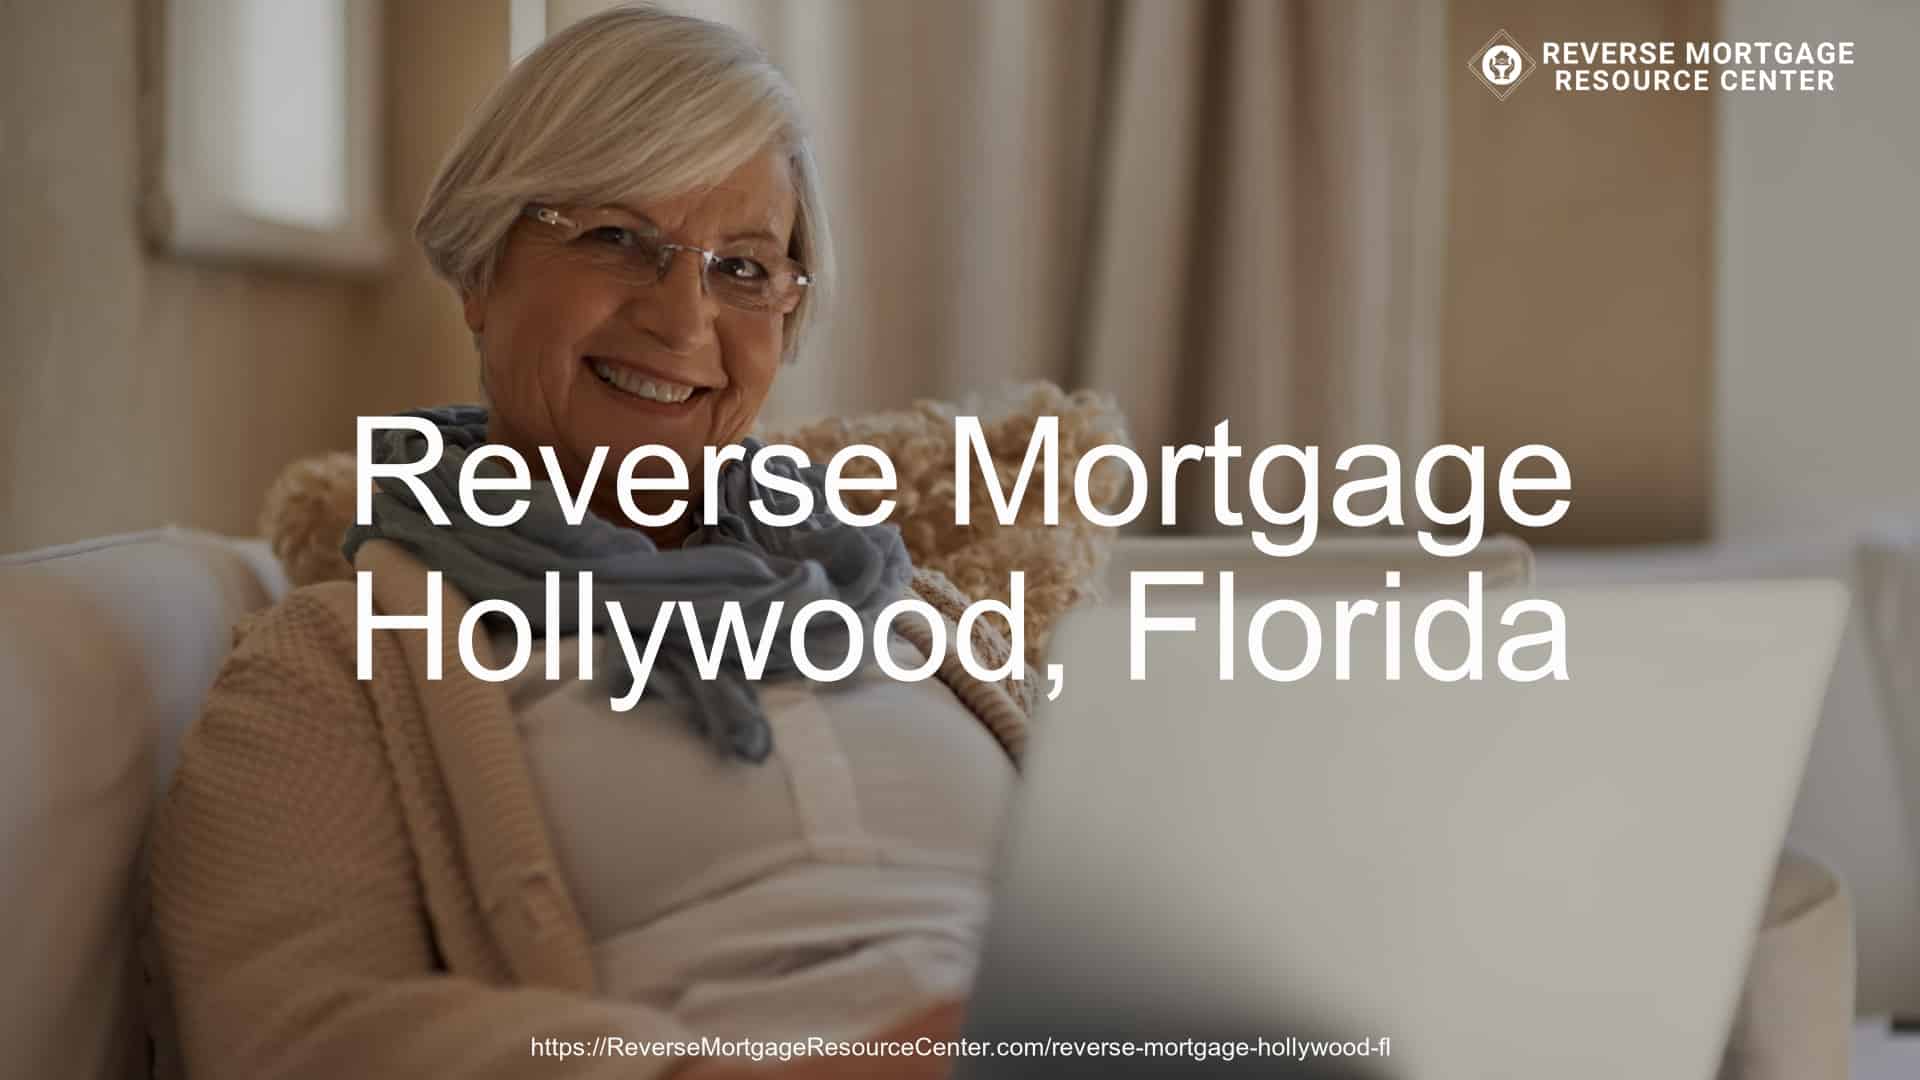 Reverse Mortgage Loans in Hollywood Florida